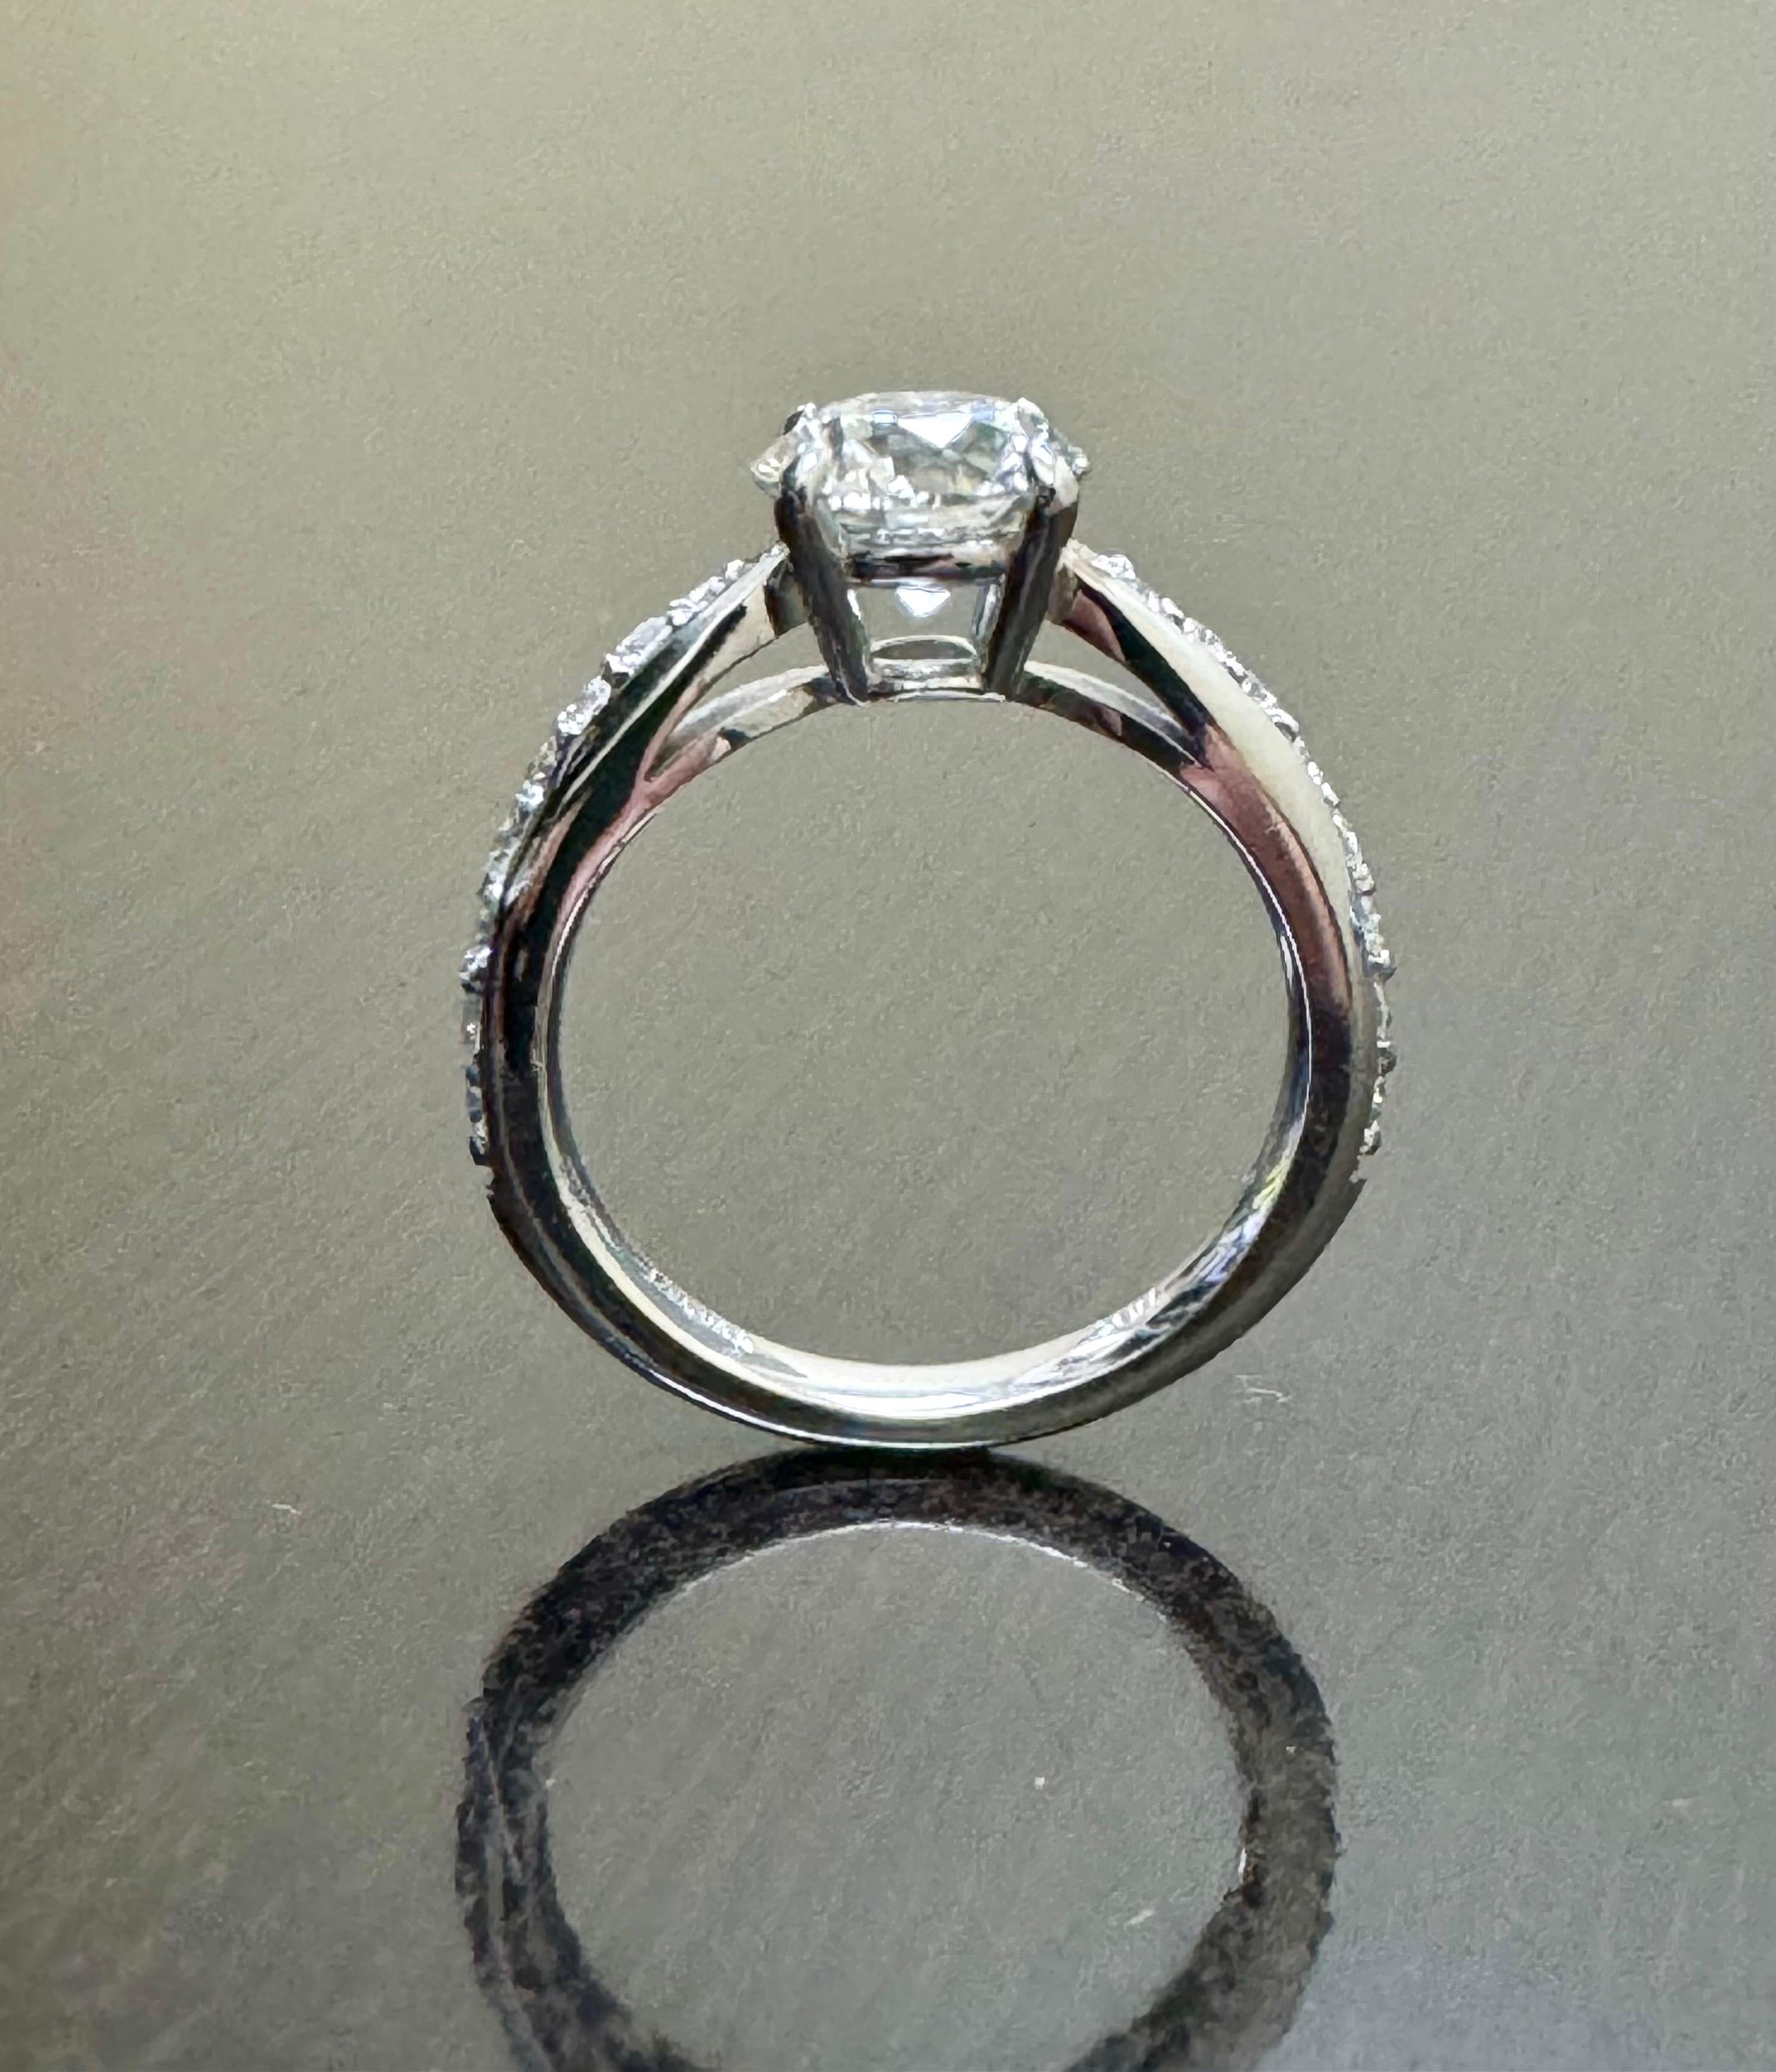 Modern 14K White Gold GIA Triple Excellent 1.70 Carat Round Diamond Engagement Ring For Sale